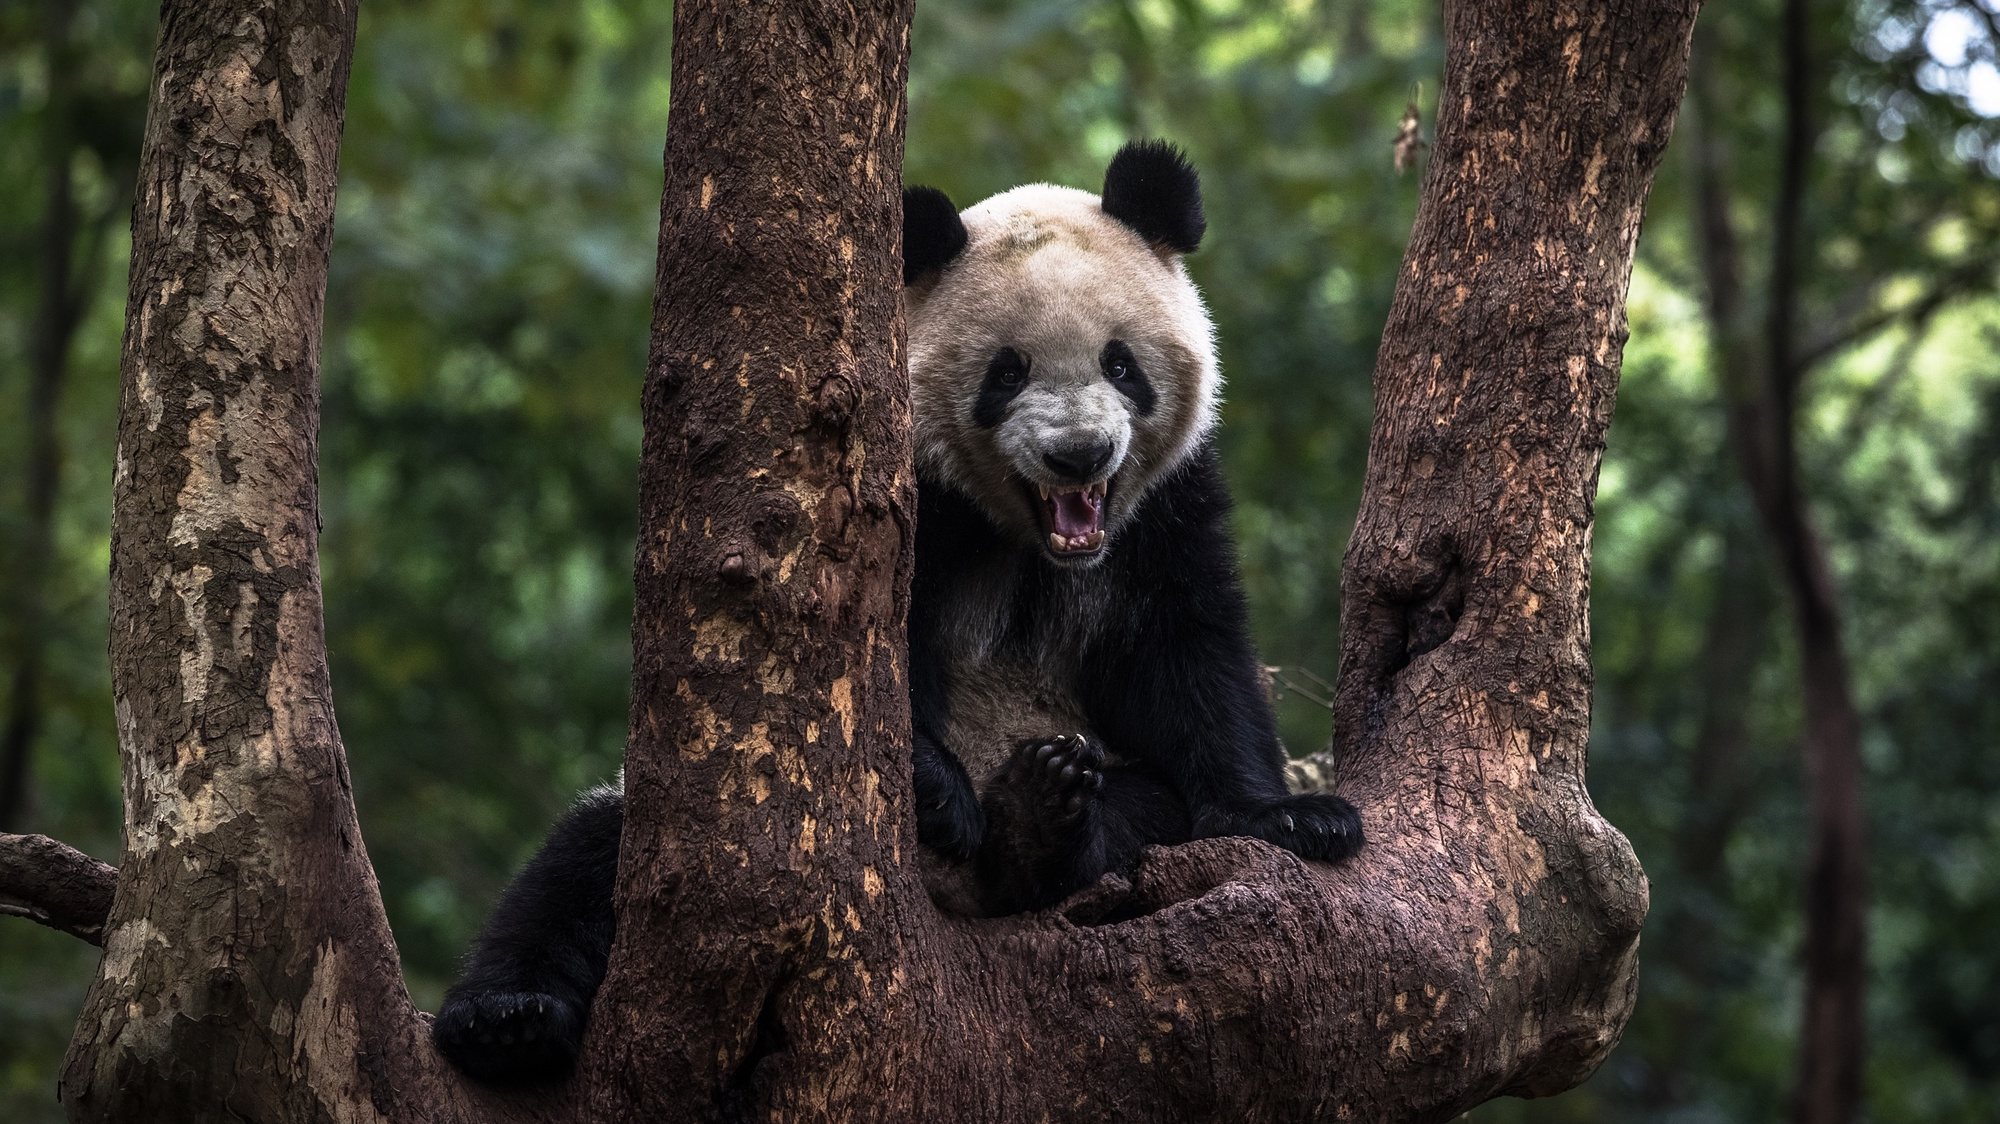 epaselect epa08041243 A giant panda sits on a tree at the Chengdu Research Base of Giant Panda Breeding, in Chengdu, China&#039;s Sichuan province, 02 December 2019 (issued 03 December 2019). Being one of the most recognizable symbols of China, giant pandas are also known for their diplomatic &#039;value&#039; and are used as China&#039;s political gifts to other countries with the term called &#039;Panda Diplomacy&#039;. According to World Wide Fund for Nature (WWF) the latest census in 2014 found that there were 1864 giant pandas alive in the wild.  EPA/ROMAN PILIPEY  ATTENTION: This Image is part of a PHOTO SET